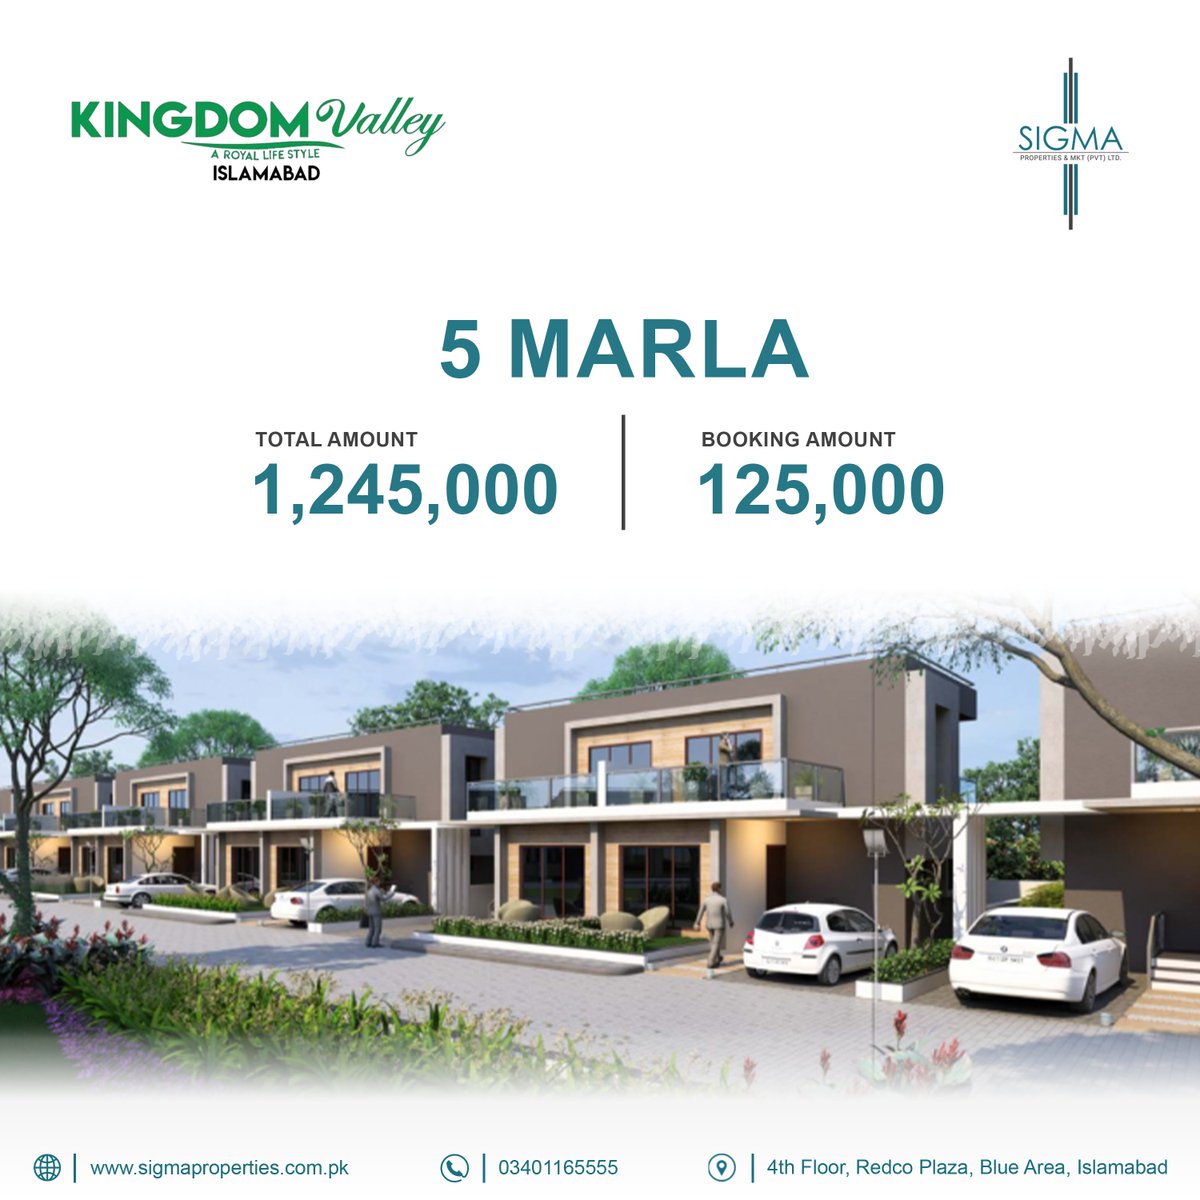 Kingdom Vallay is a low-cost houisng society offering residential plot at cost-effective prices. You can book a residential plot of 5-marla at a down payment of only PKR 125,000 #KingdomValley #kingdomvalleyislamabad #kingdomvalleyofficial #kingdomvalleypvt #realestate